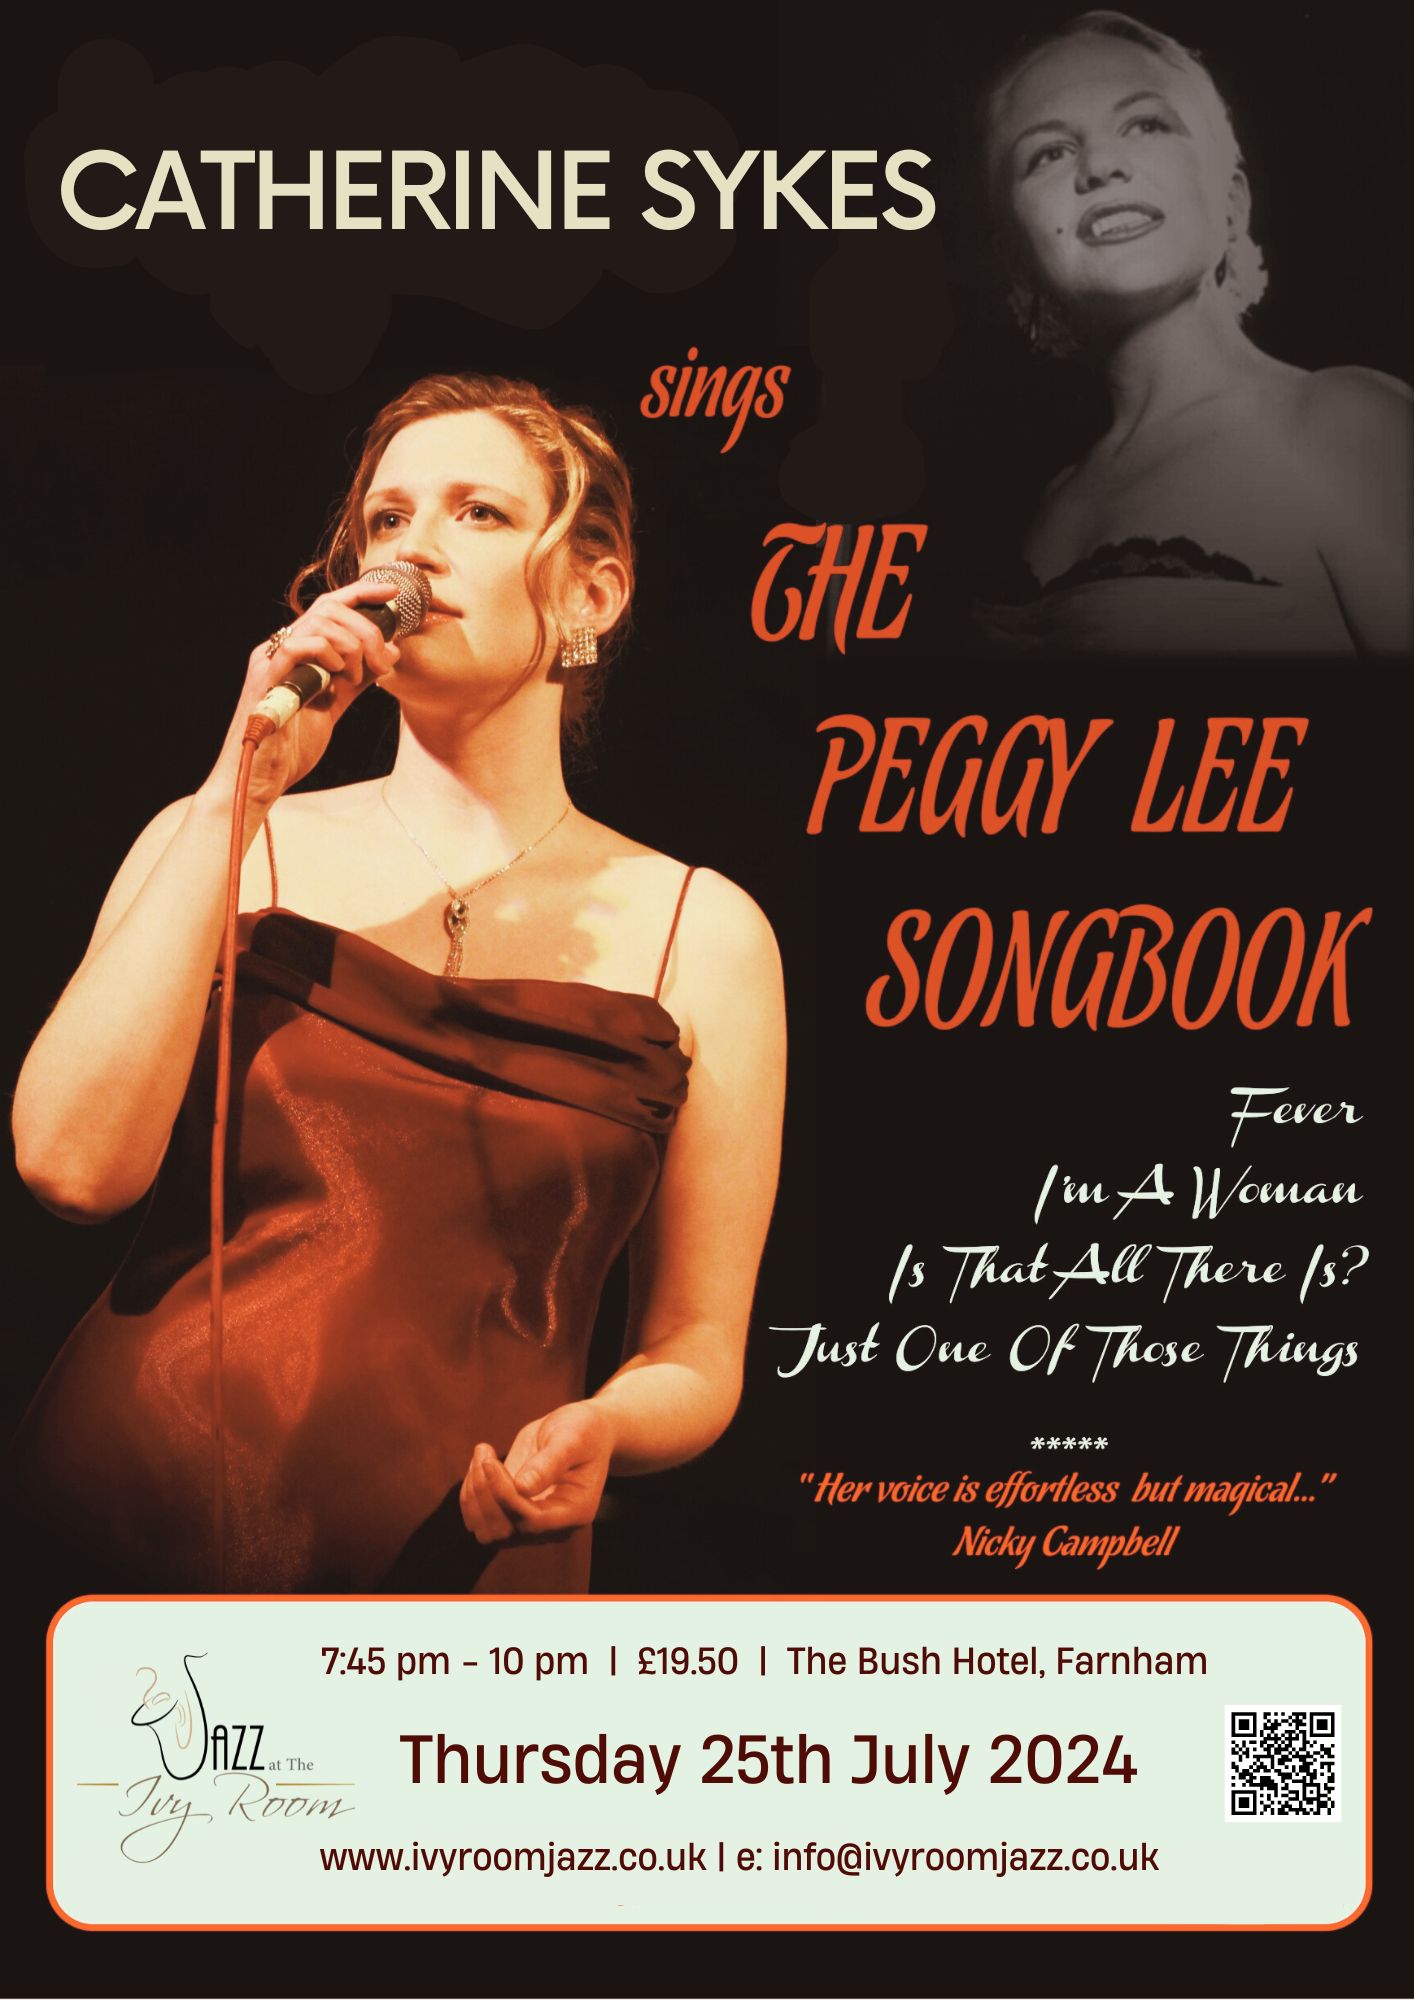 CATHERINE SYKES Sings The Peggy Lee Songbook